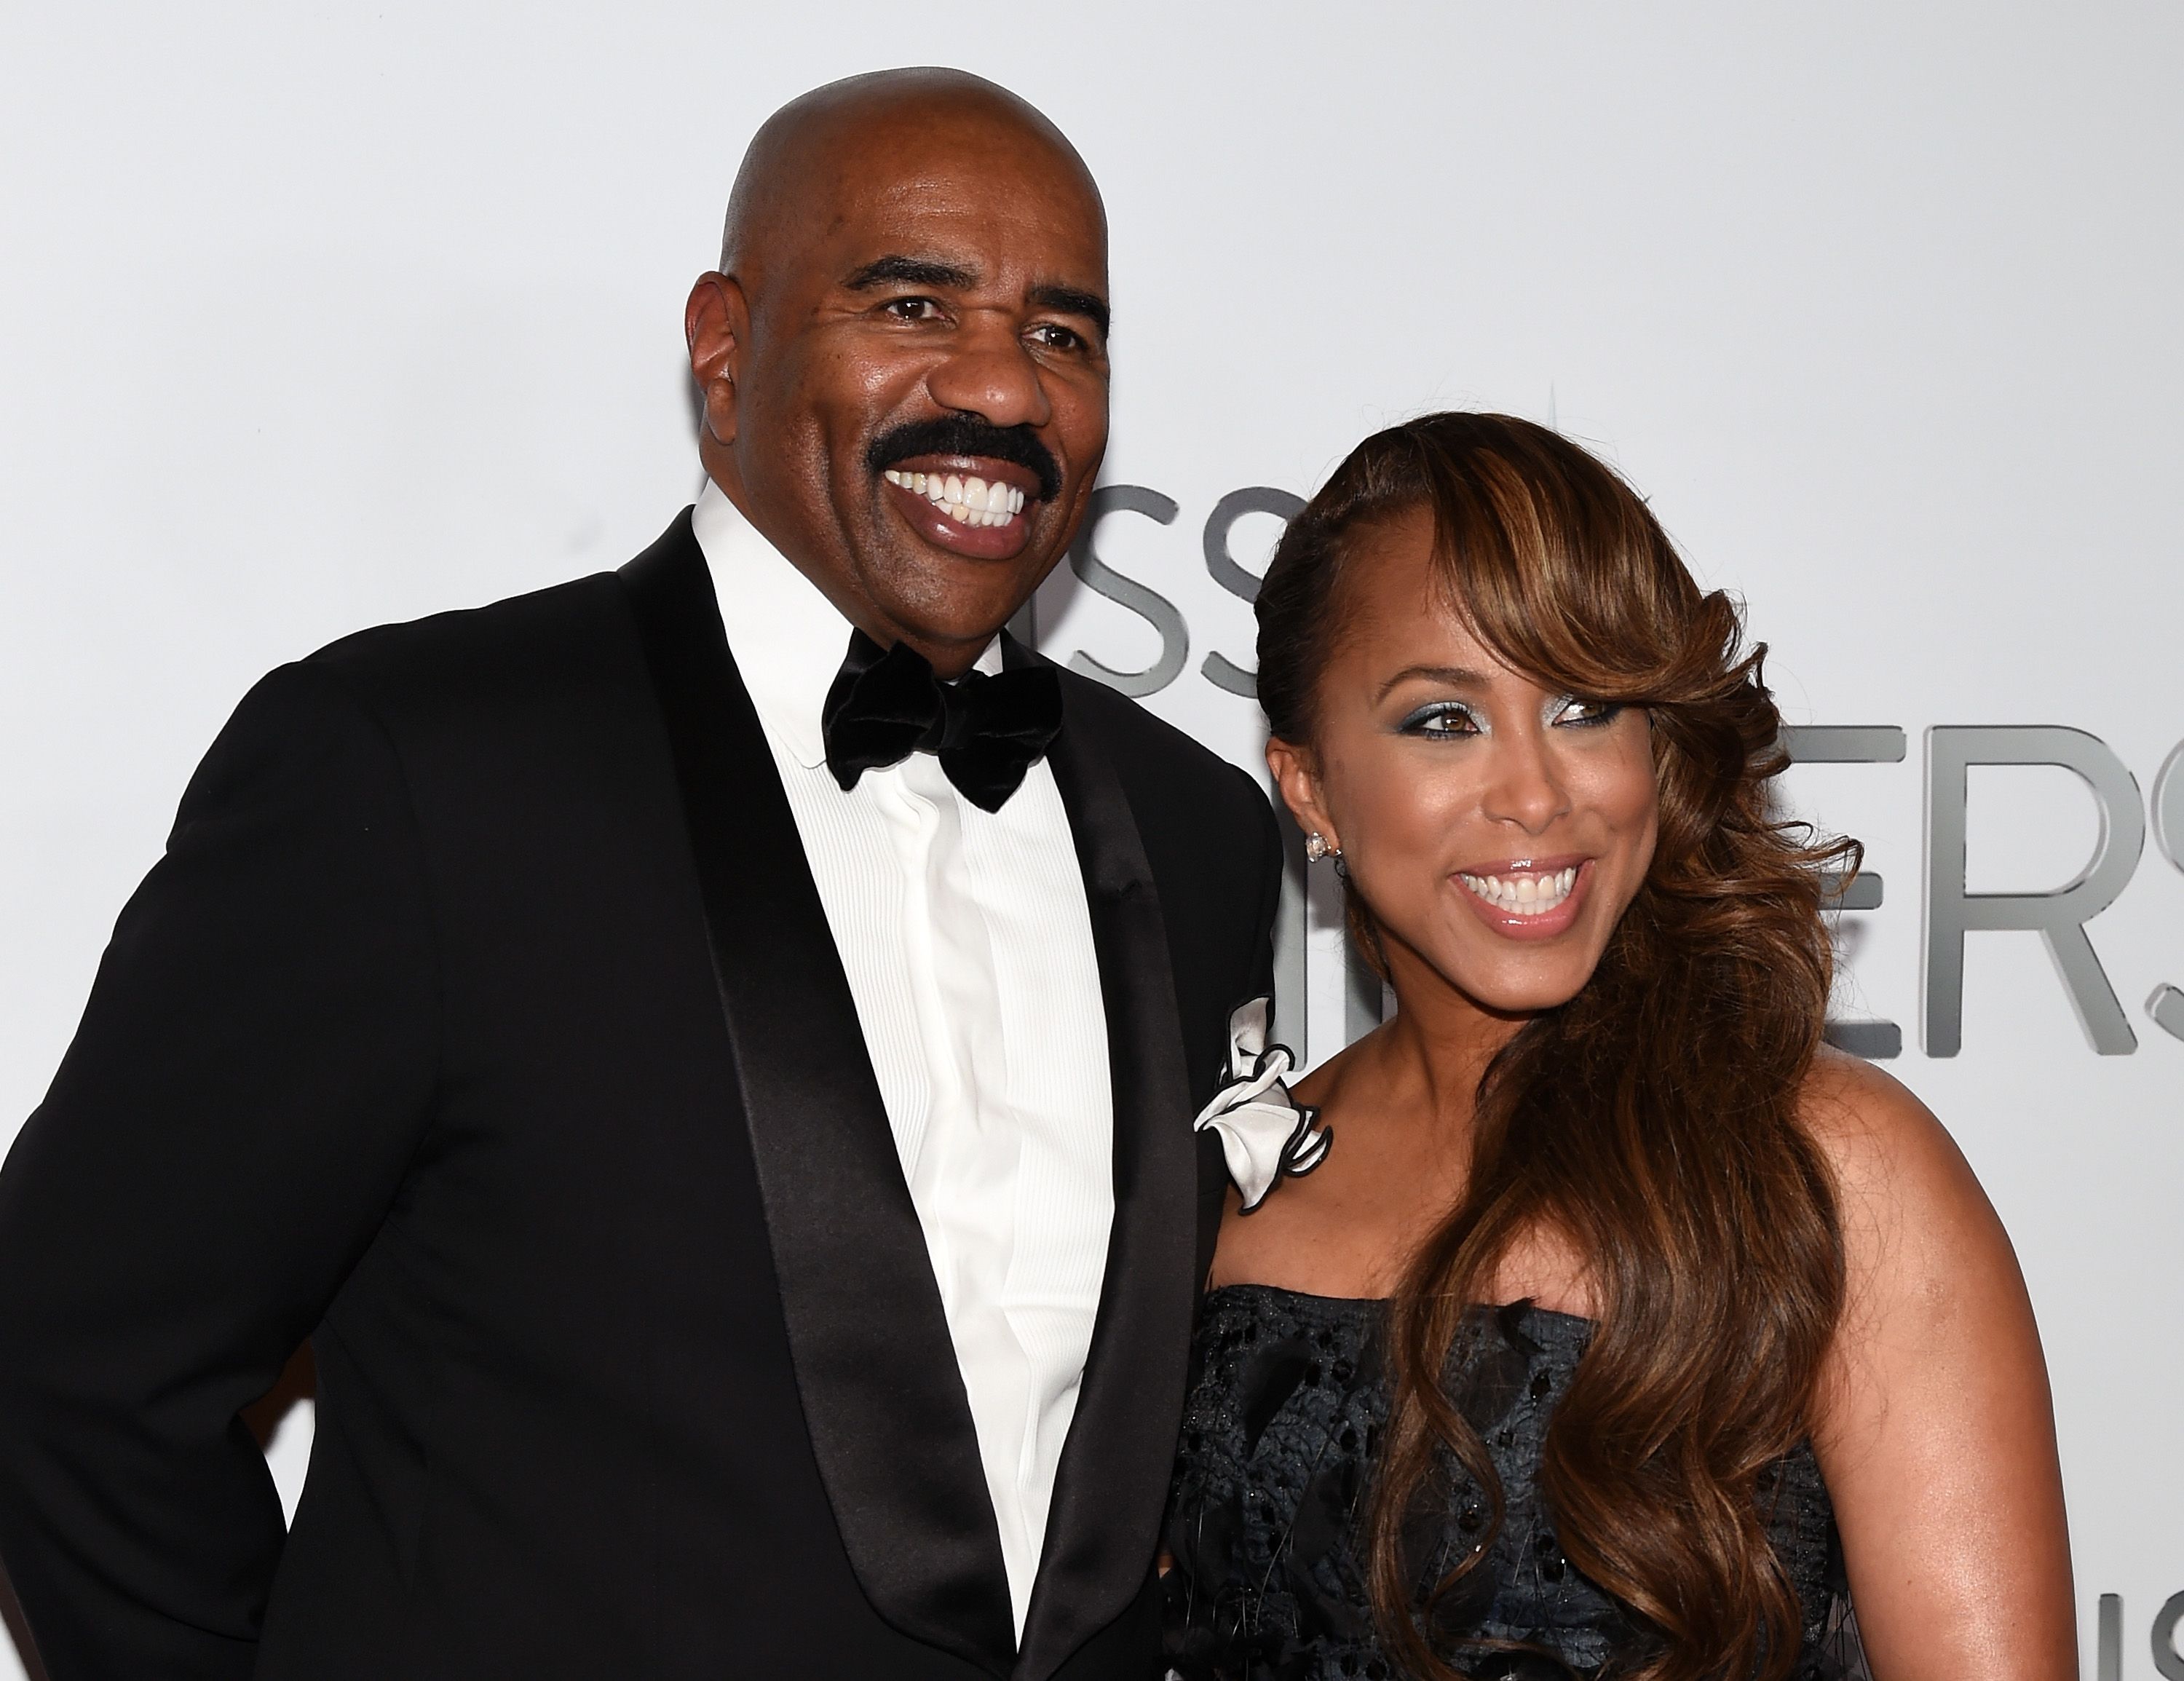 Television personality and host Steve Harvey and his wife Marjorie Harvey at the 2015 Miss Universe Pageant at Planet Hollywood Resort & Casino on December 20, 2015 | Photo: Getty Images